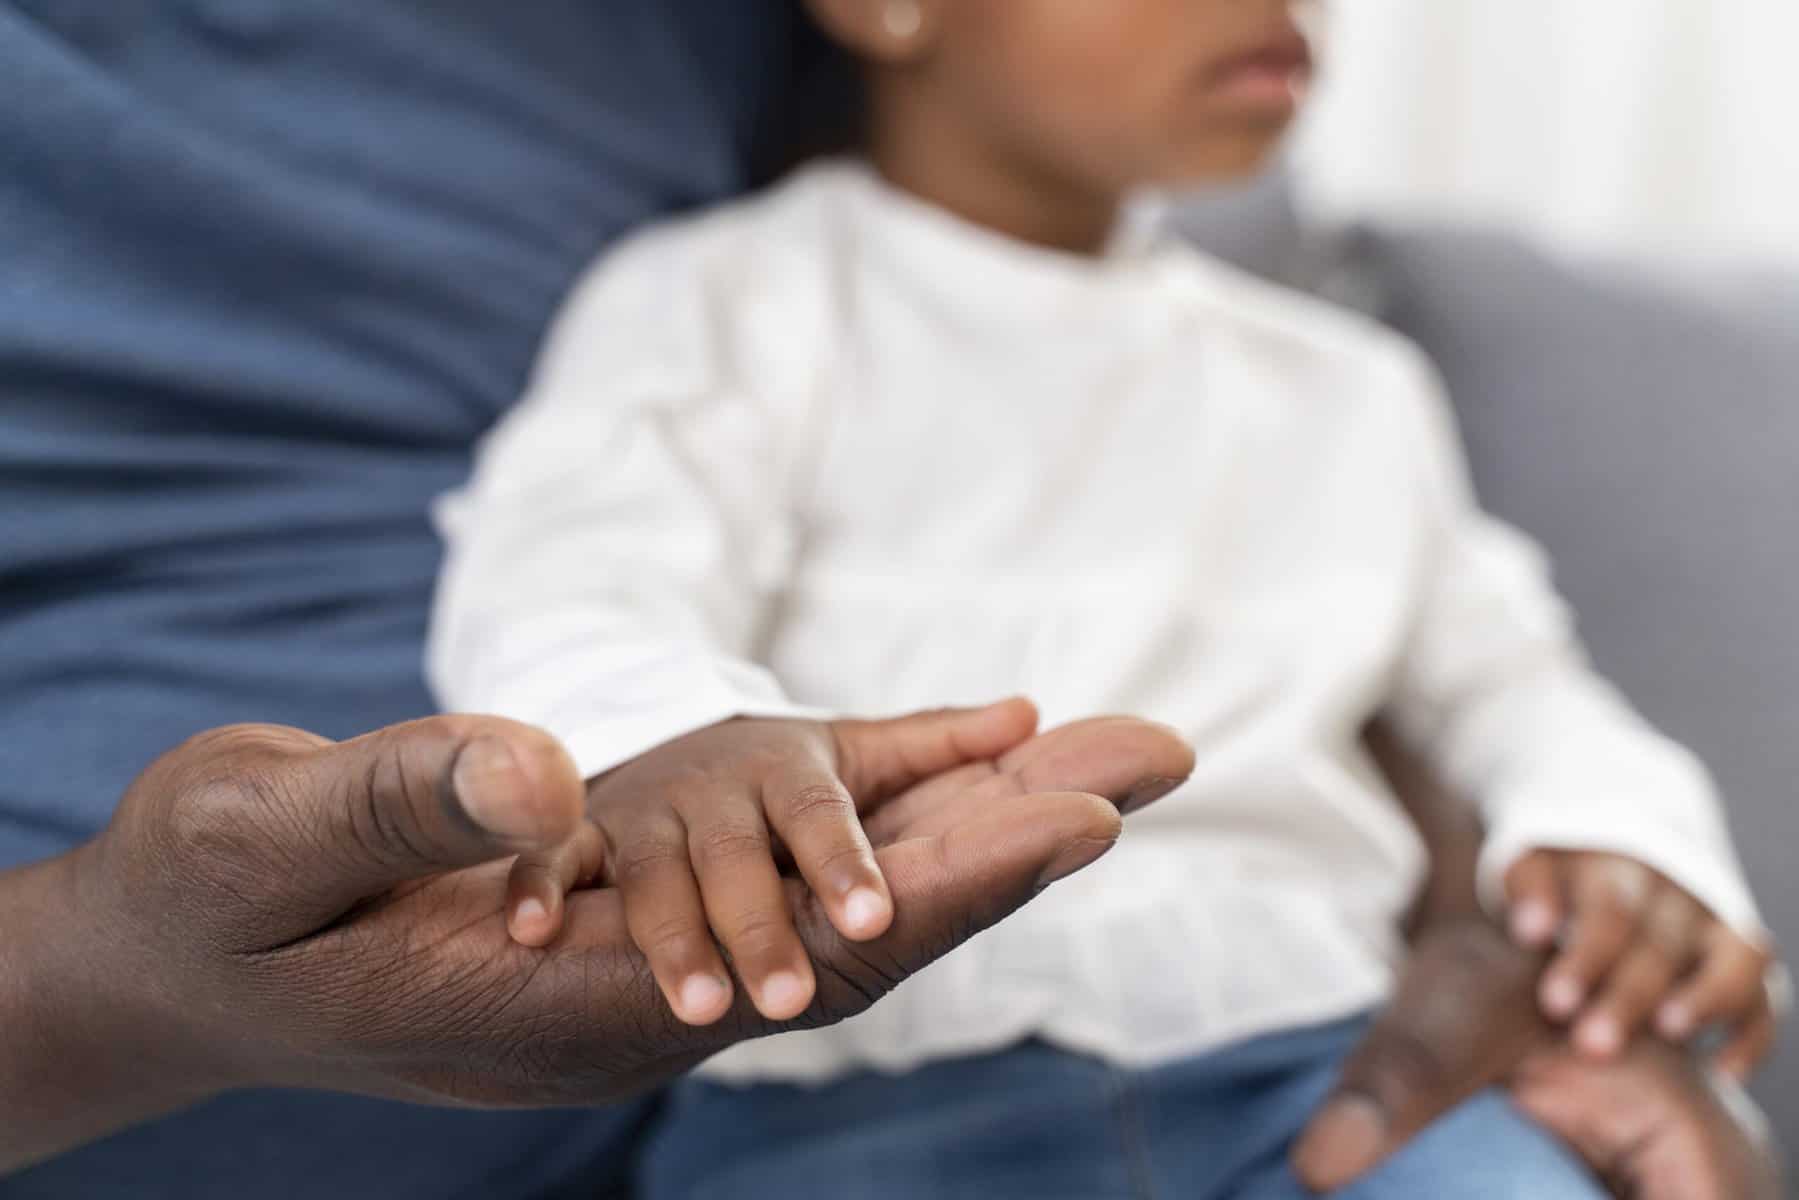 A young Black child sits on the lap of a Black man with hands resting on the man's palm up hands.